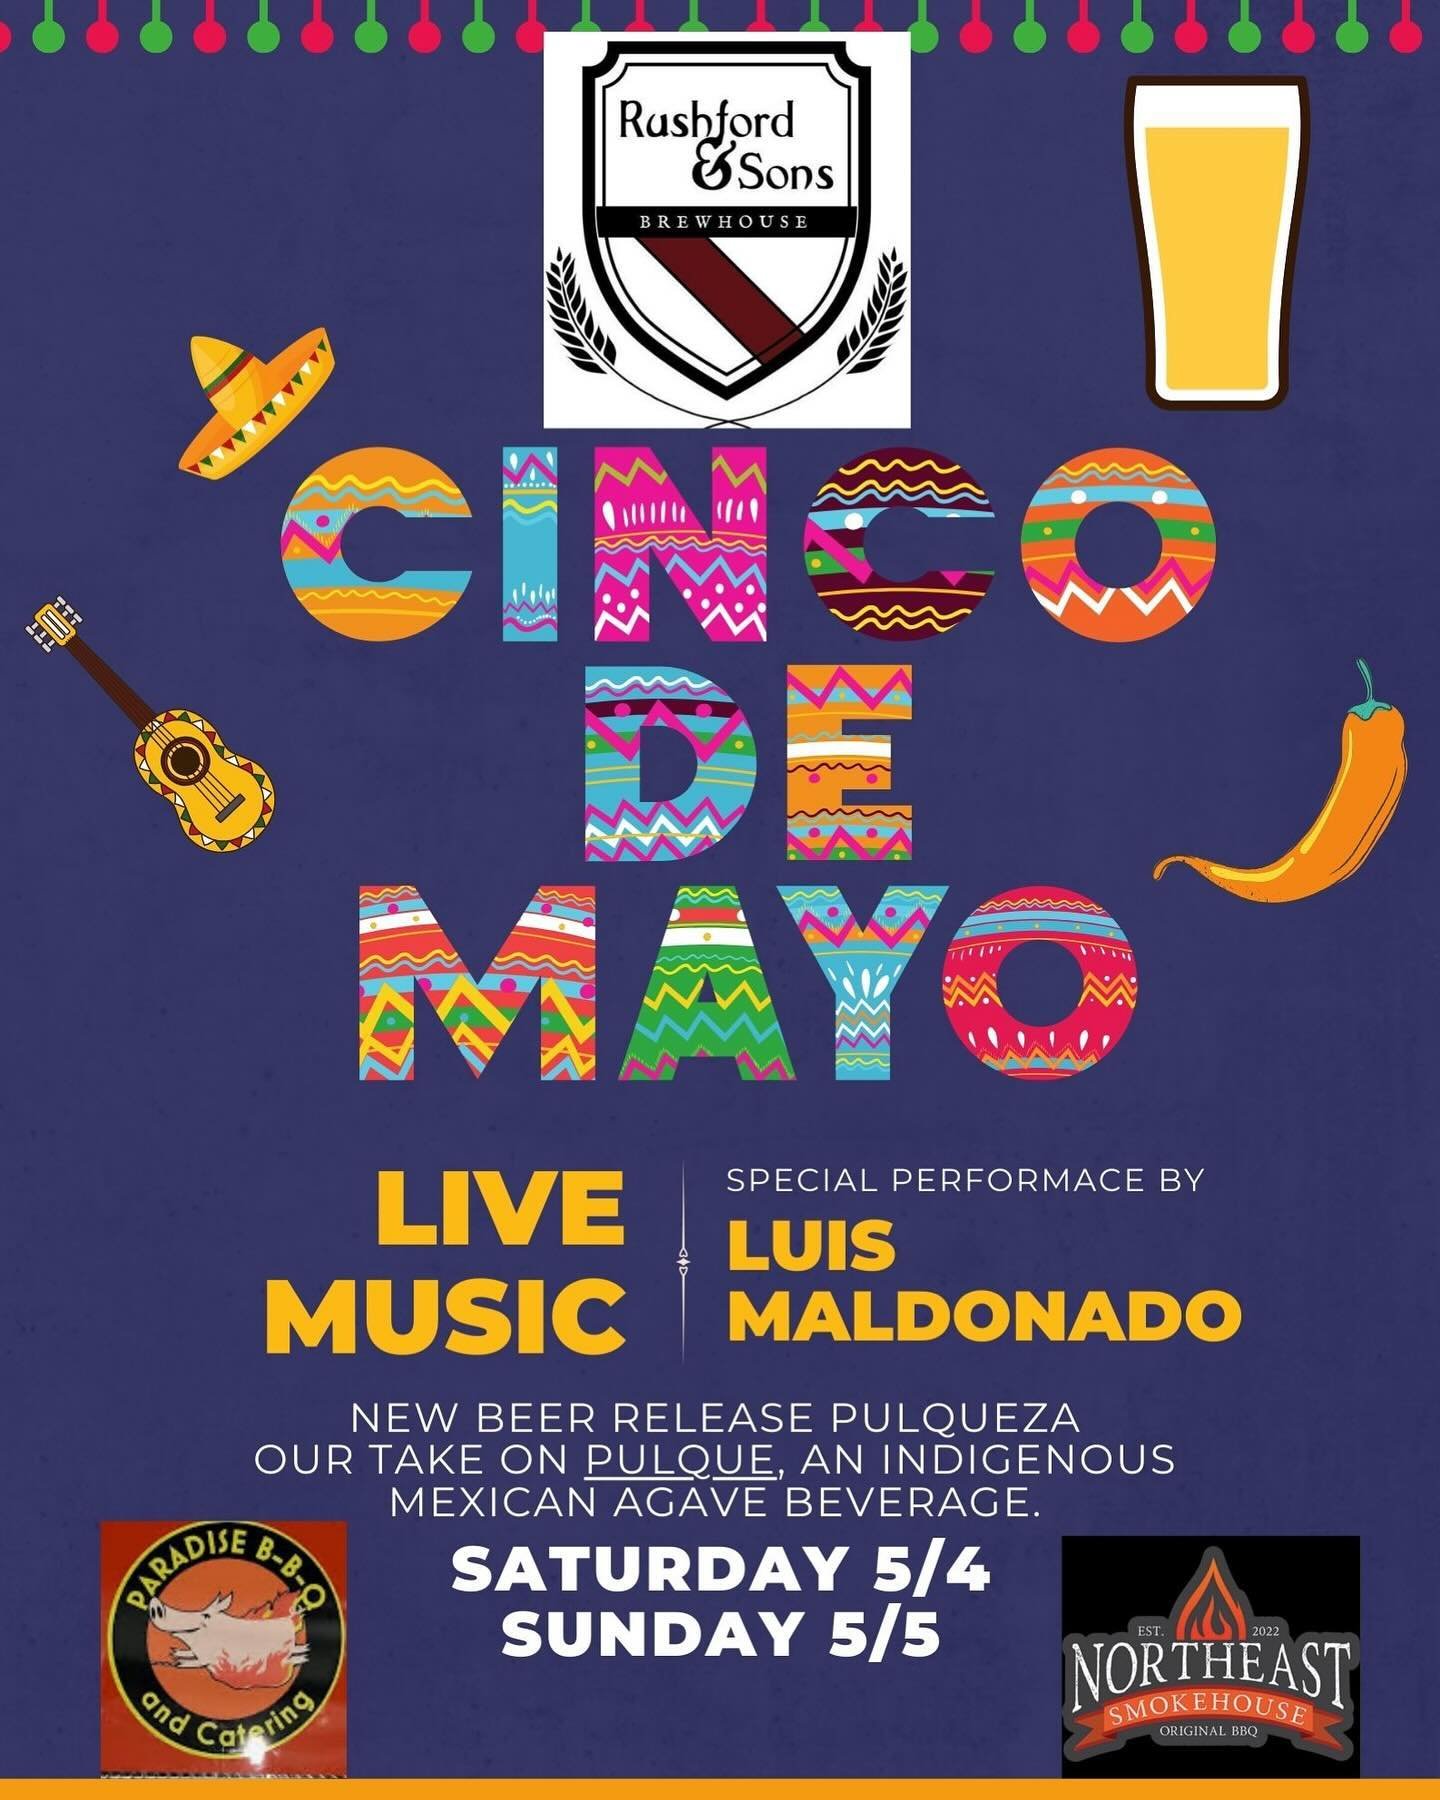 Celebrate Cinco de Mayo here at the brew house with a 
new Beer Release:  Pulqueza, a traditional Mexican beer made with Agave along with barley and corn which will only be available Cinco de Mayo weekend. 
We will also have our special Margarita sel